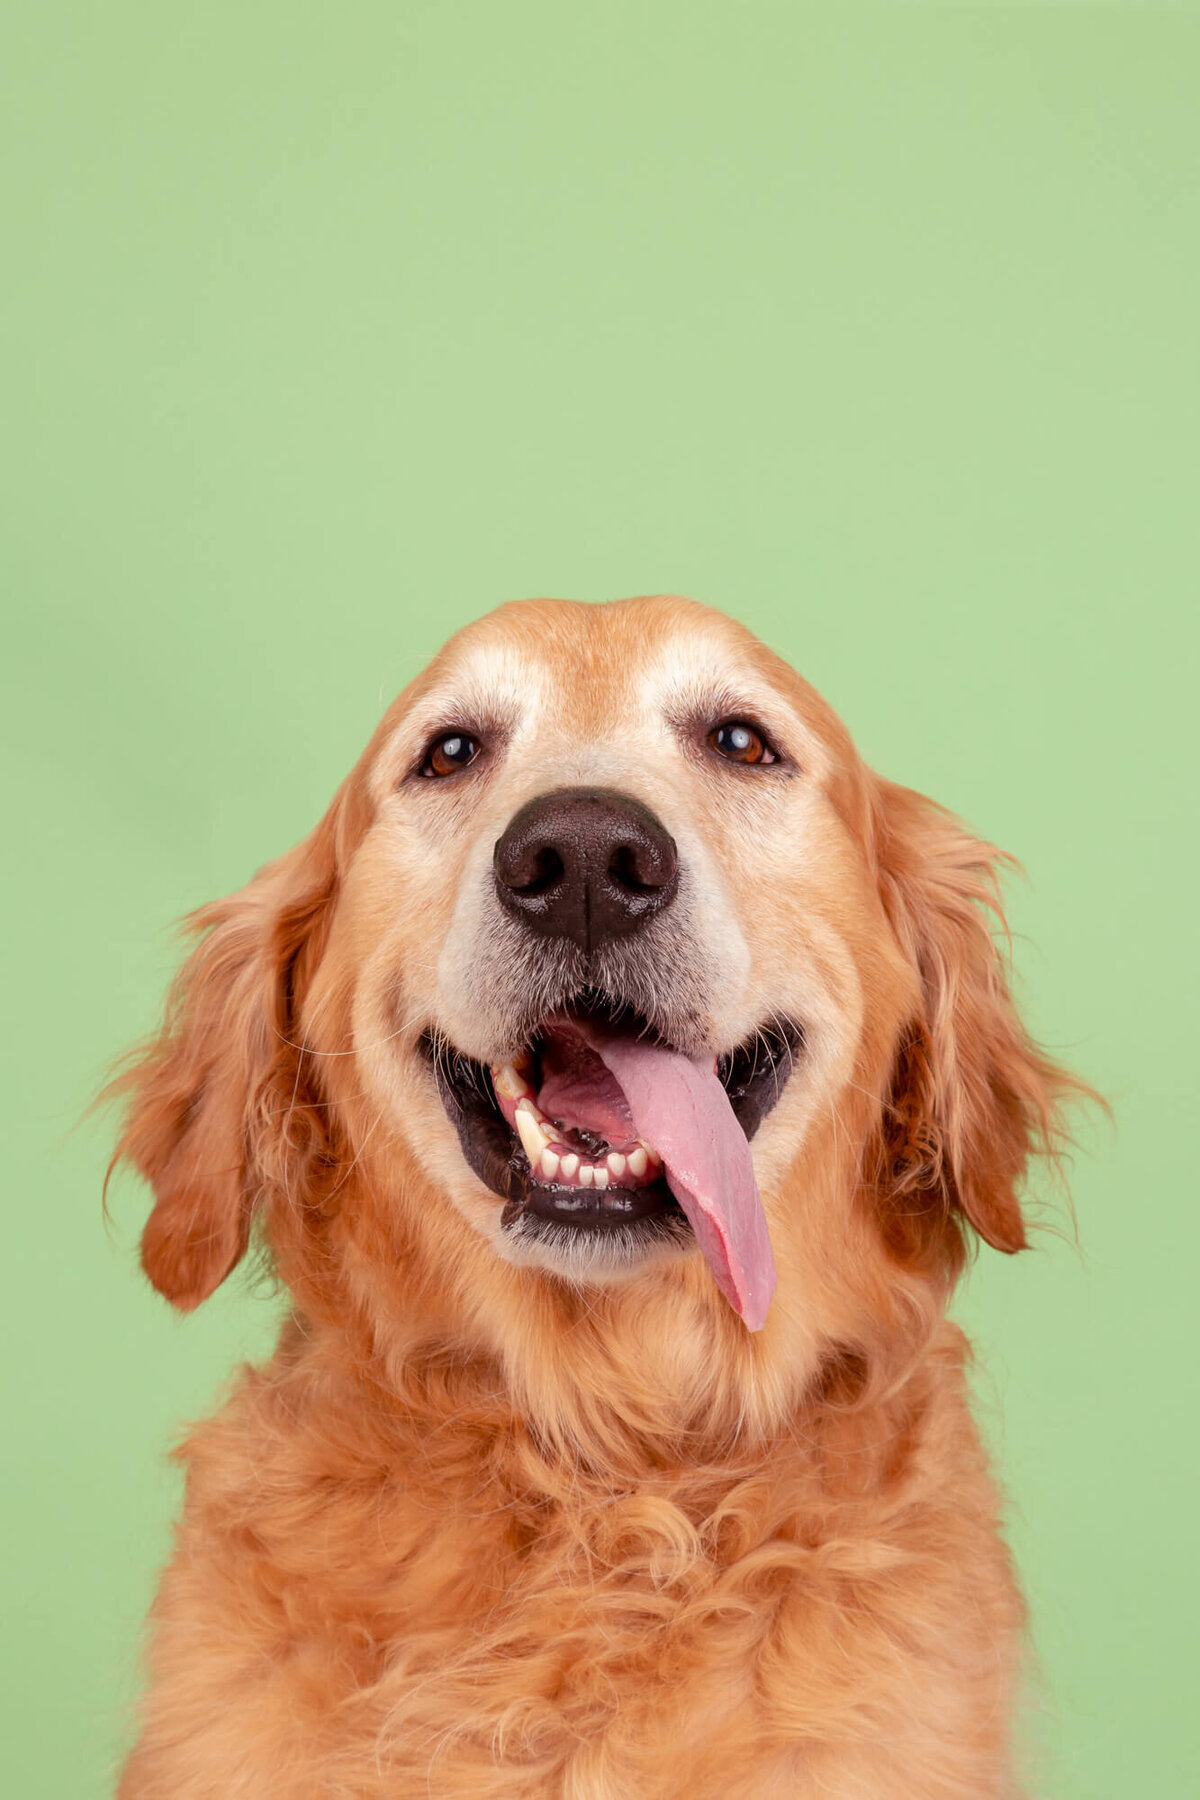 Senior golden retriever with tongue hanging out on mint green backdrop